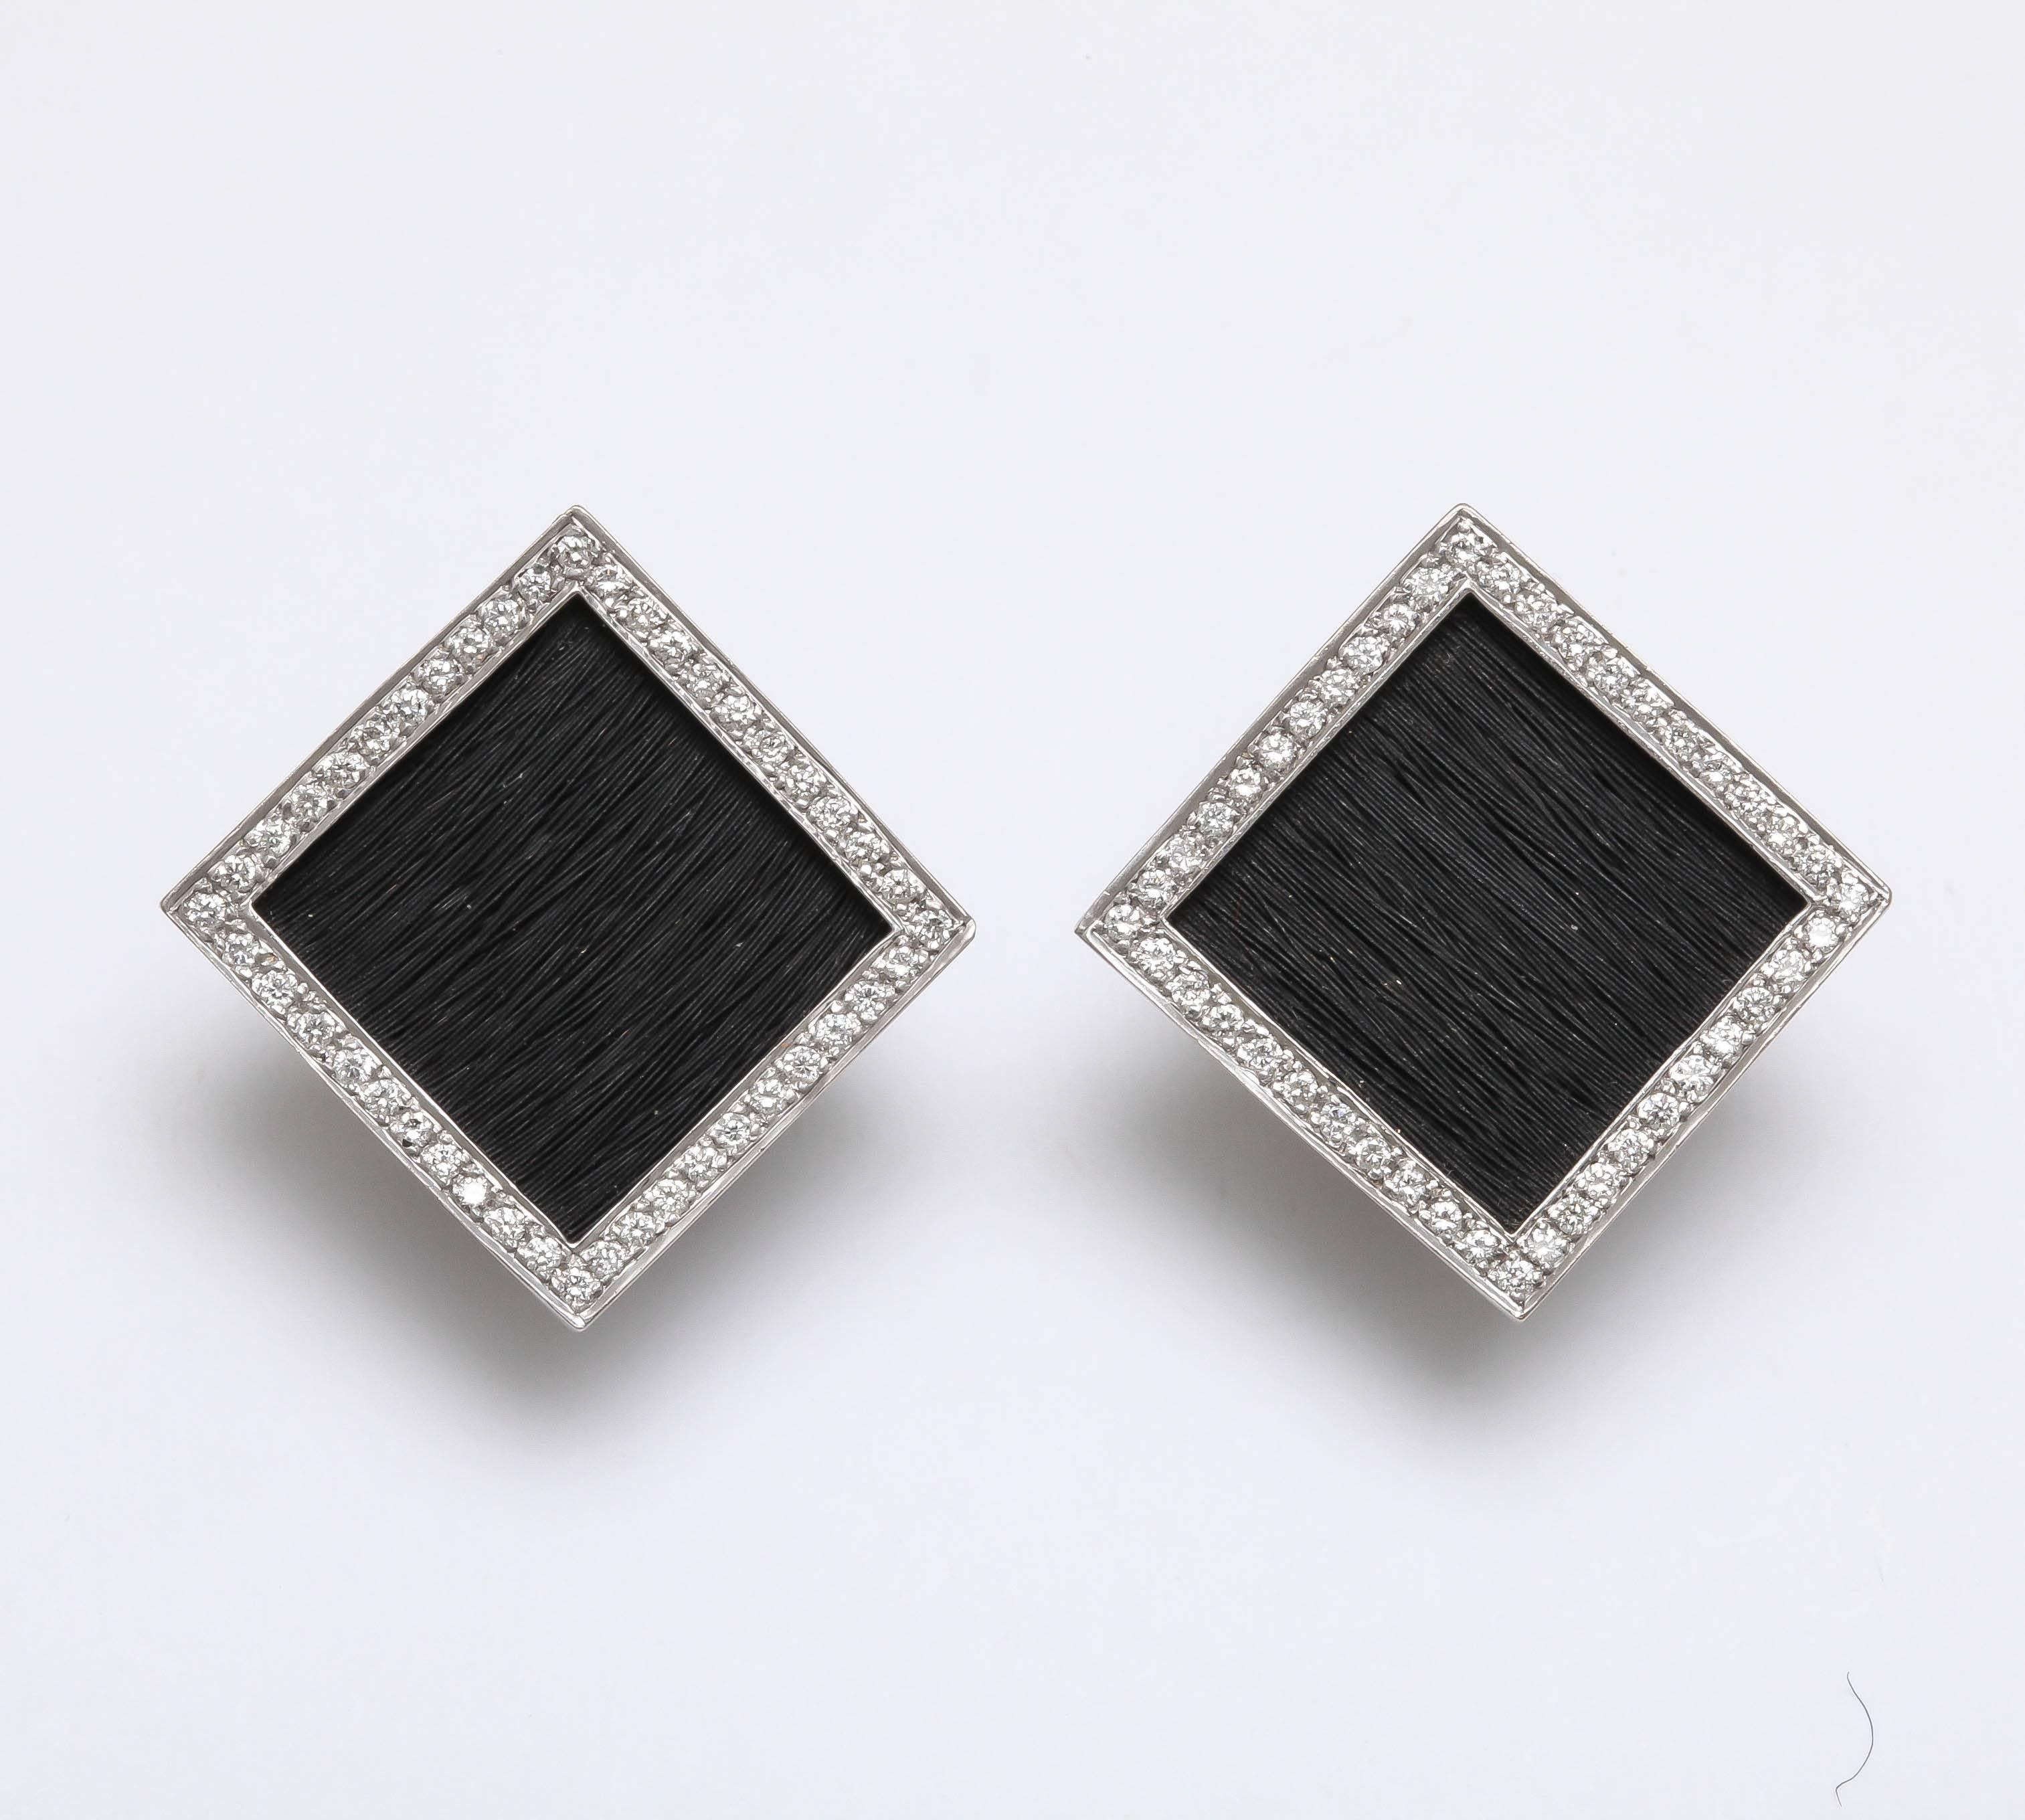 Each square decorated with oxidized gold wire within a border of brilliant-cut diamonds. 